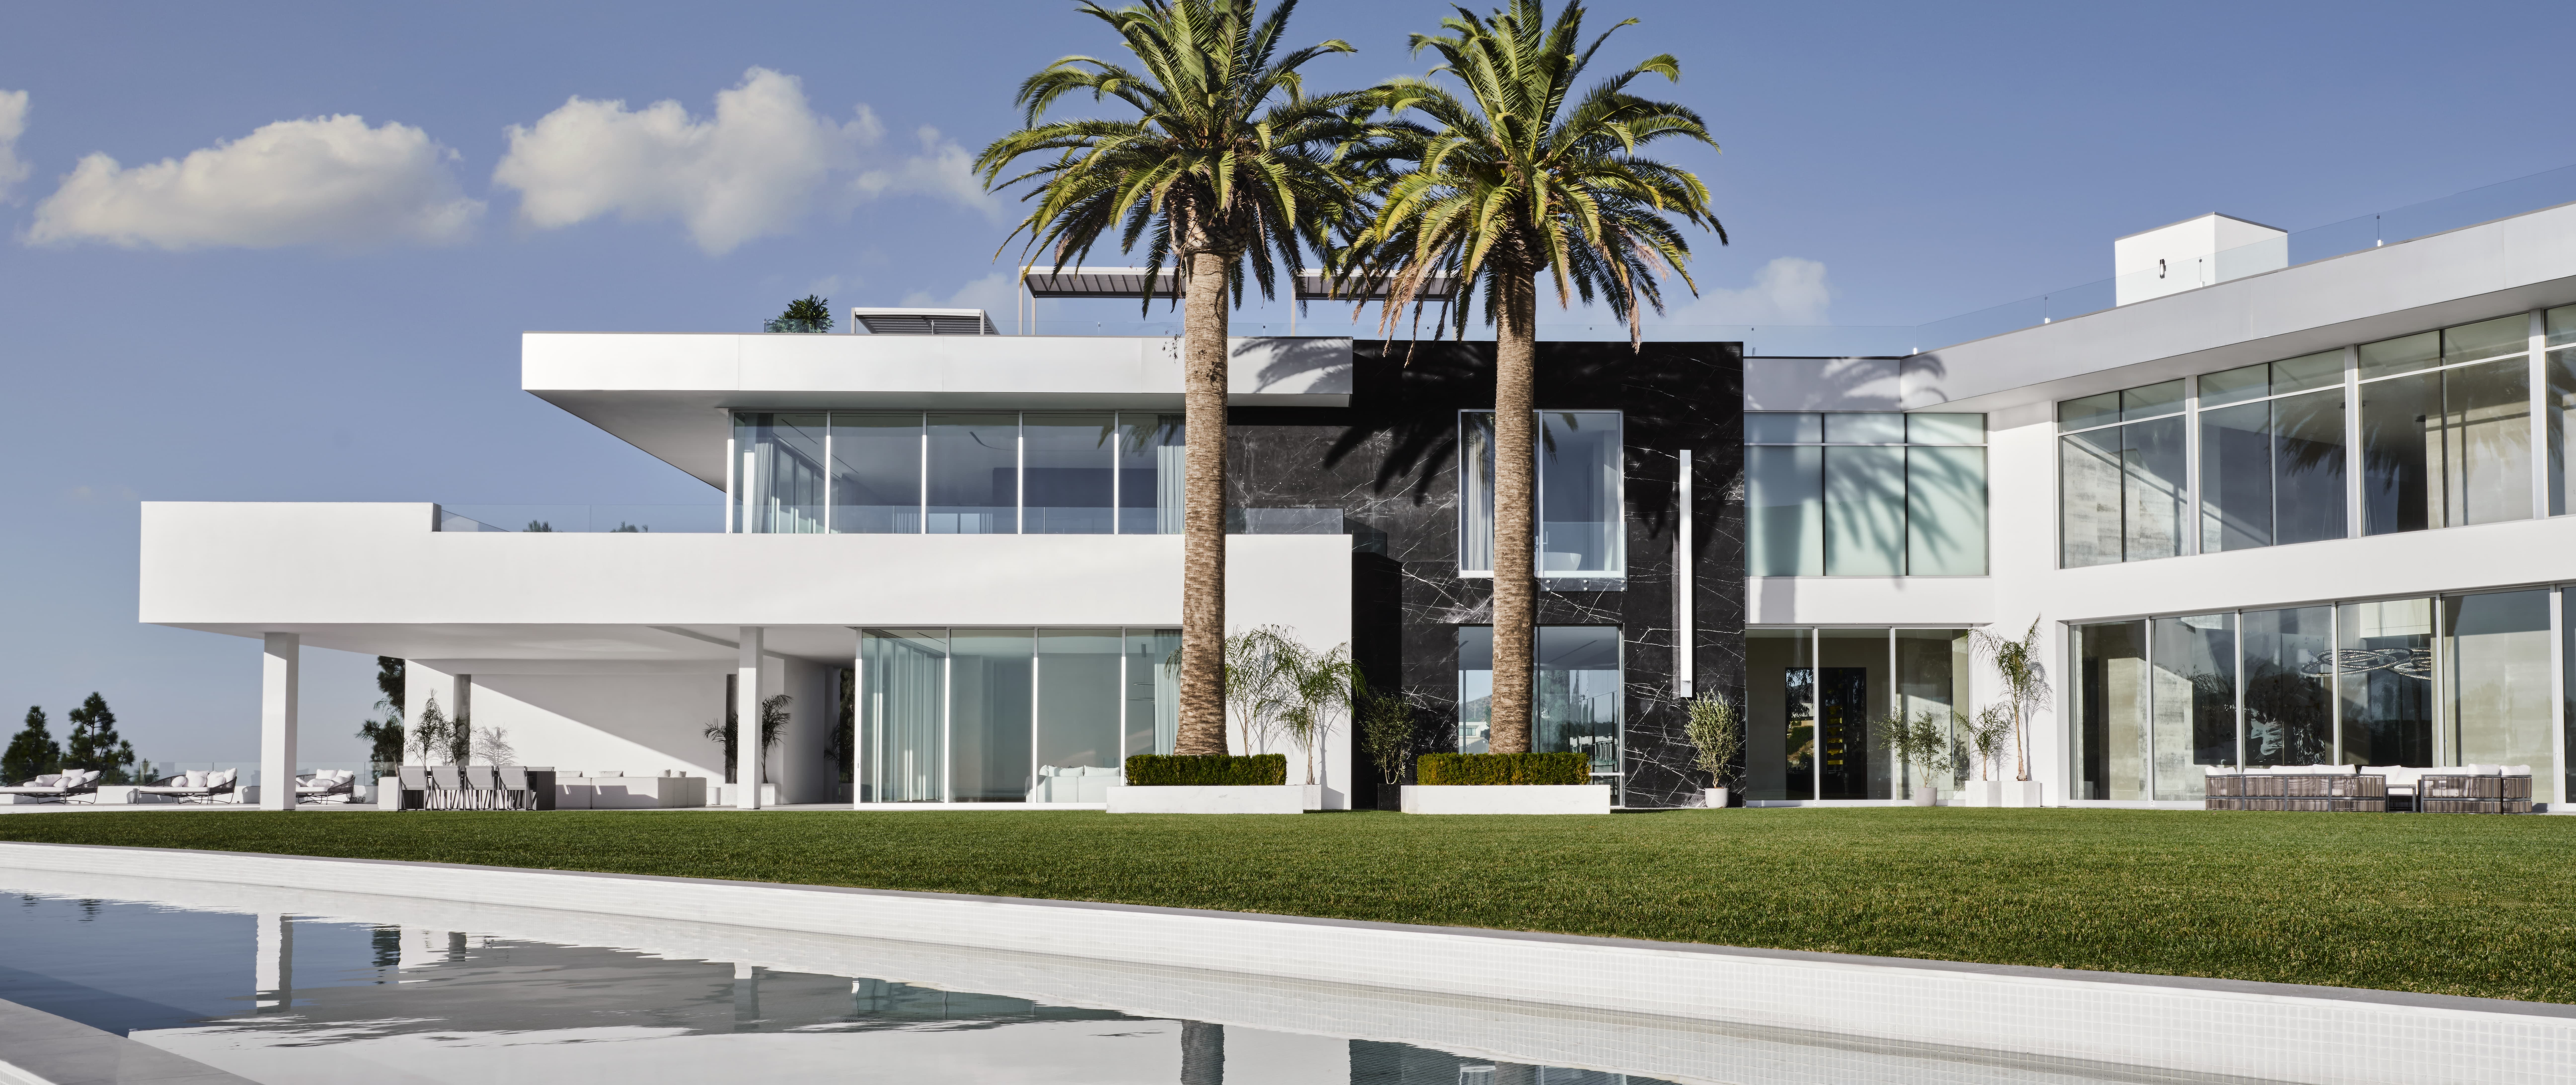 Meet 'The One,' The World's Largest Home, Now For Sale in Los Angeles